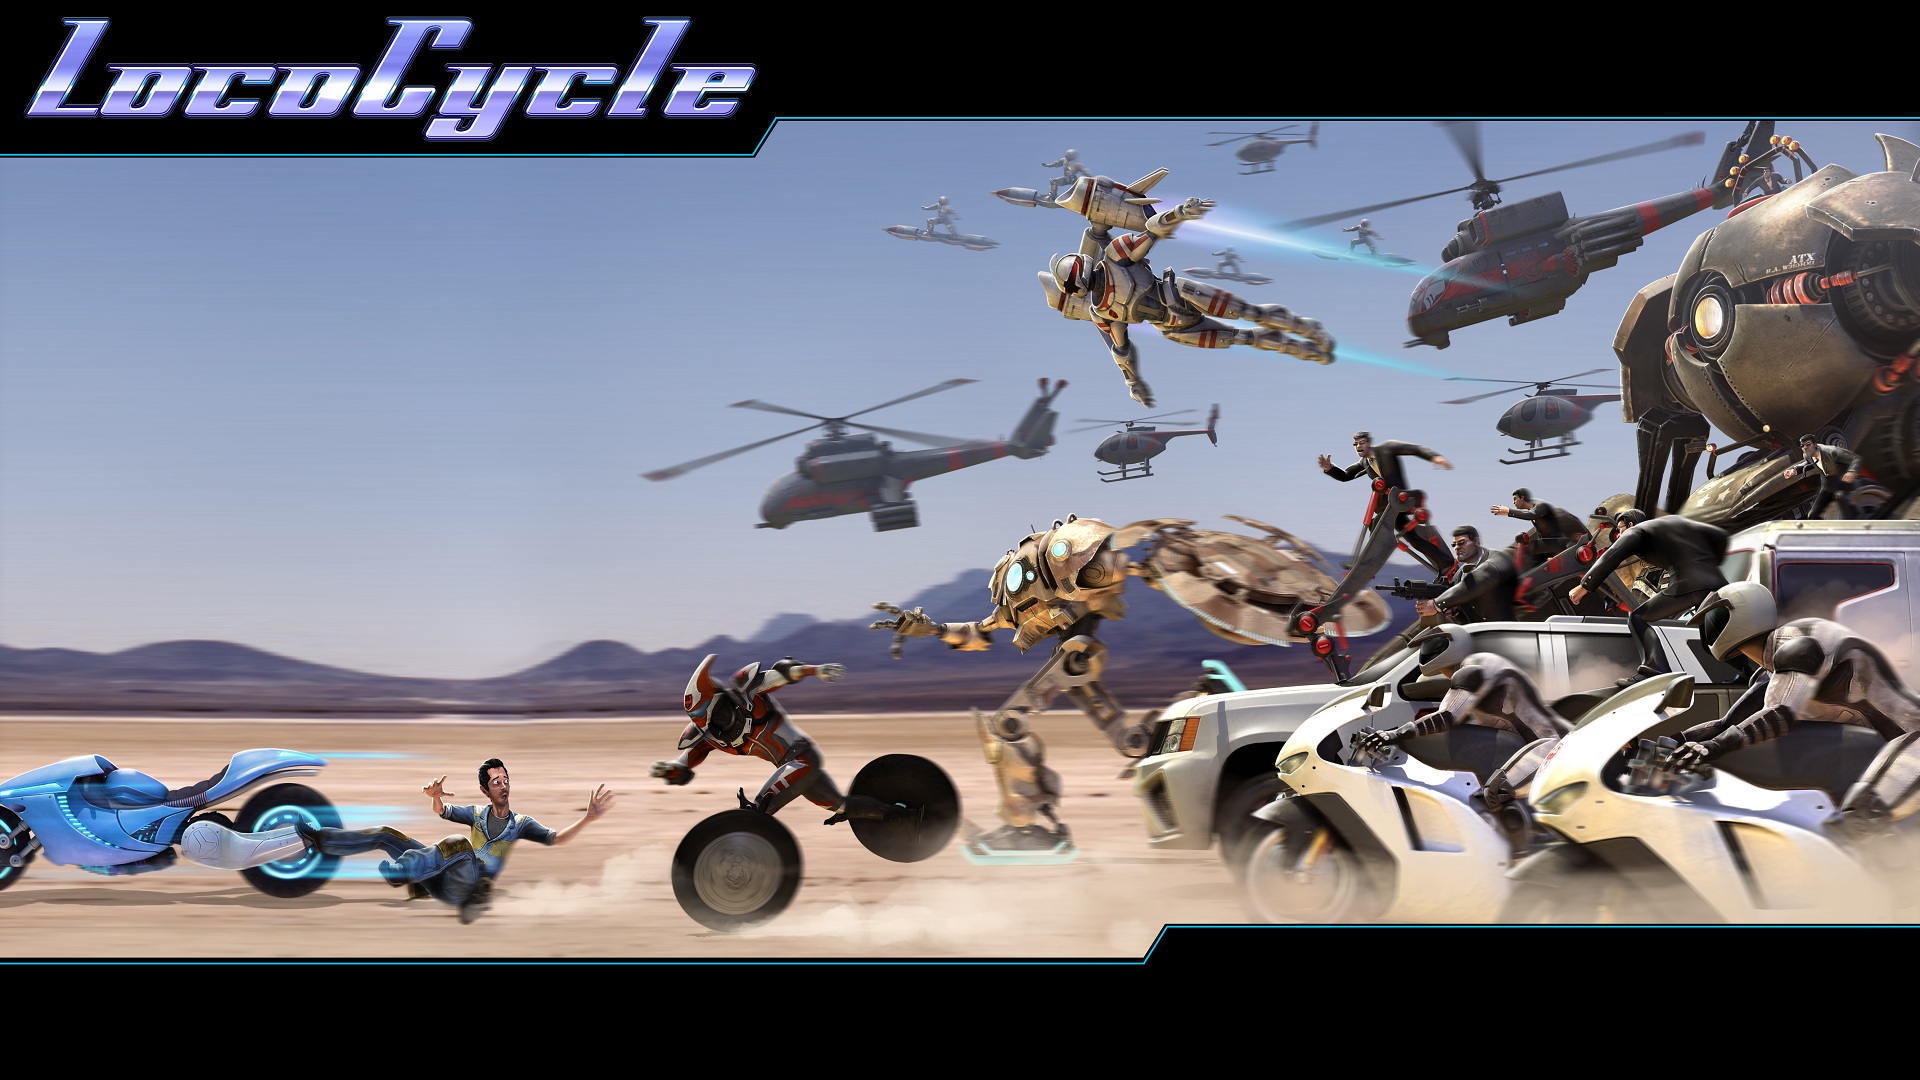 LocoCycle, Twisted Pixel, I.R.I.S., Pablo, Helicopters, Video Games Wallpaper